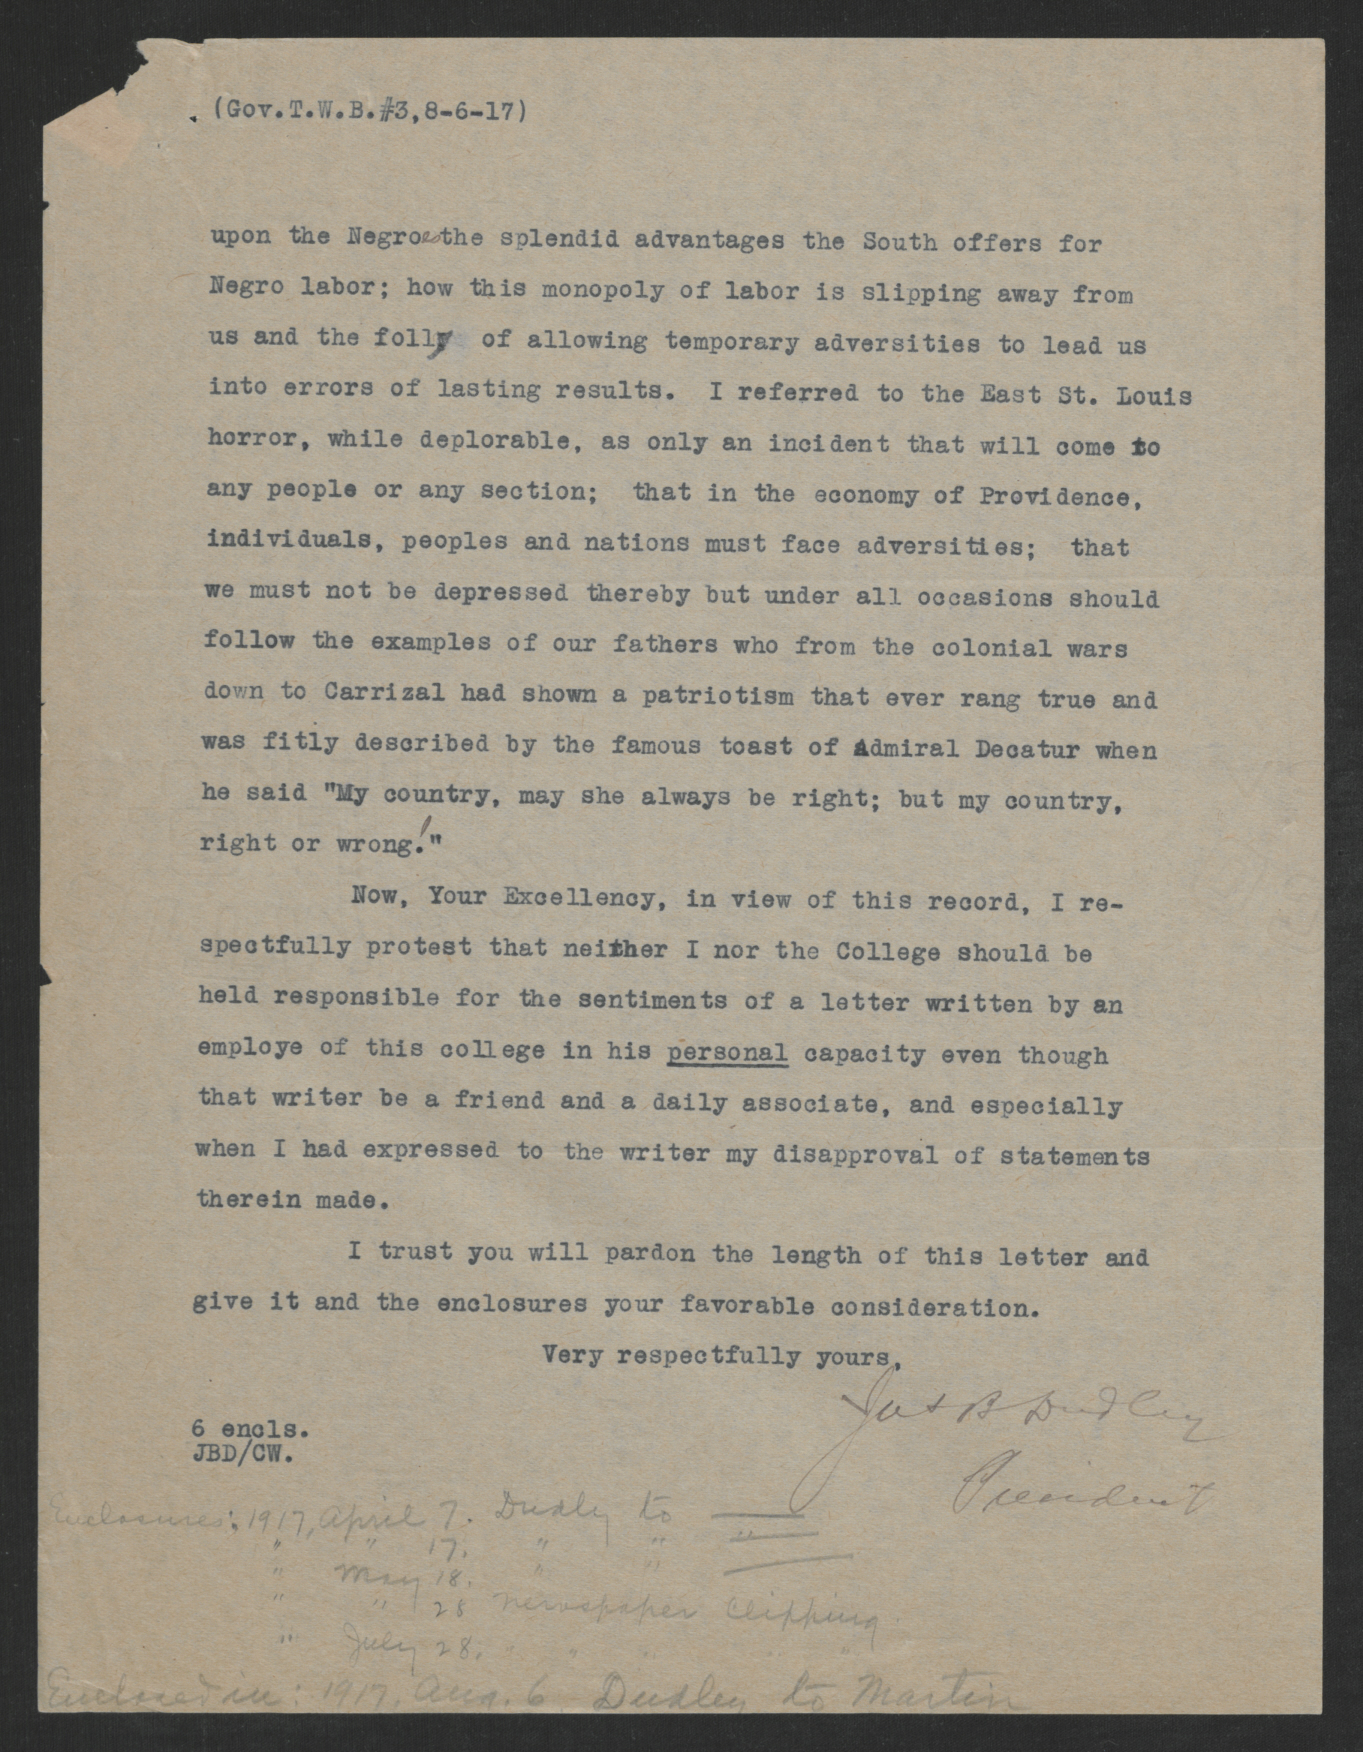 Letter from James B. Dudley to Gov. Bickett, August 6, 1917 - Page 3